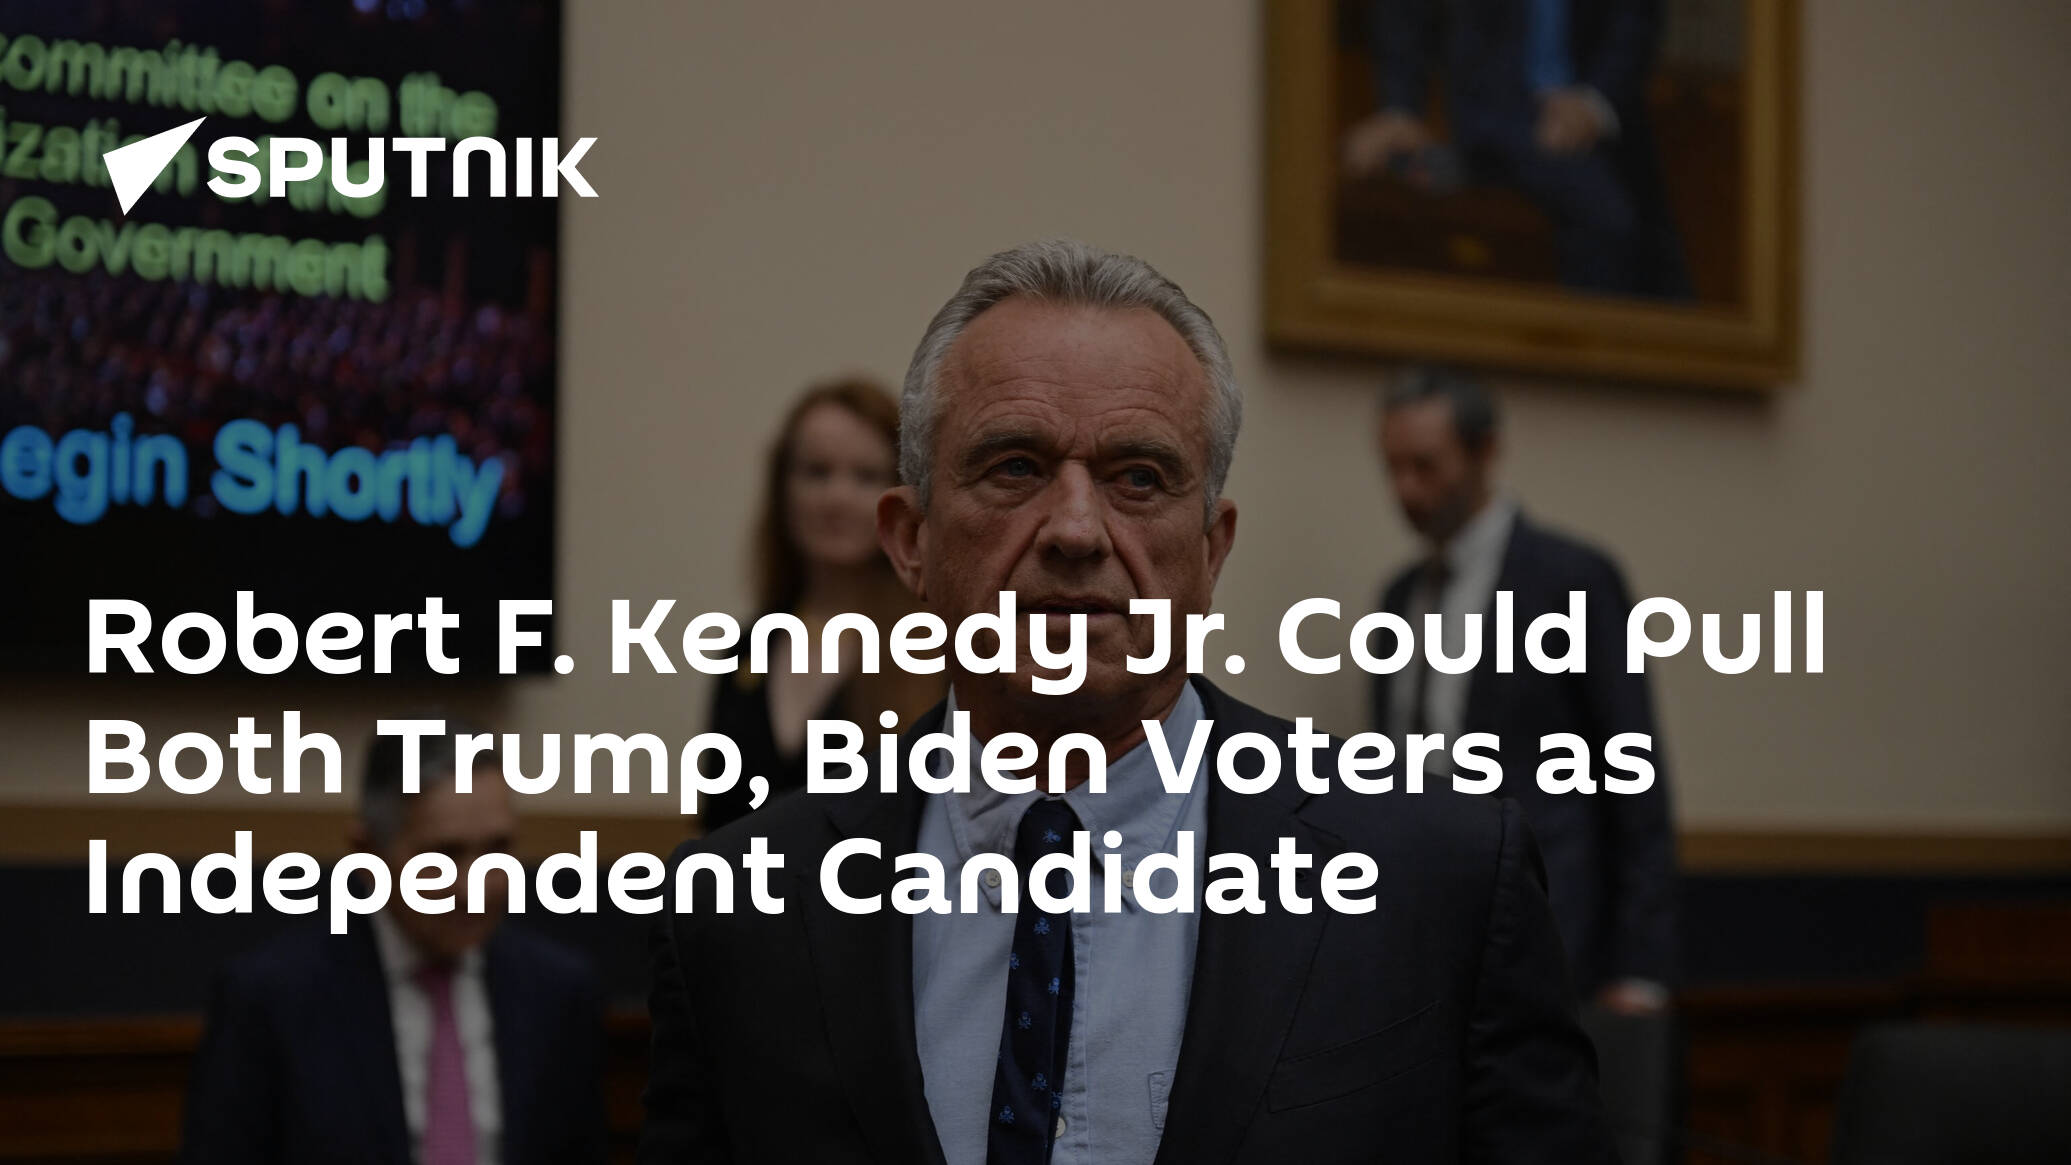 Robert F. Kennedy Jr. Could Pull Both Trump, Biden Voters as Independent Candidate